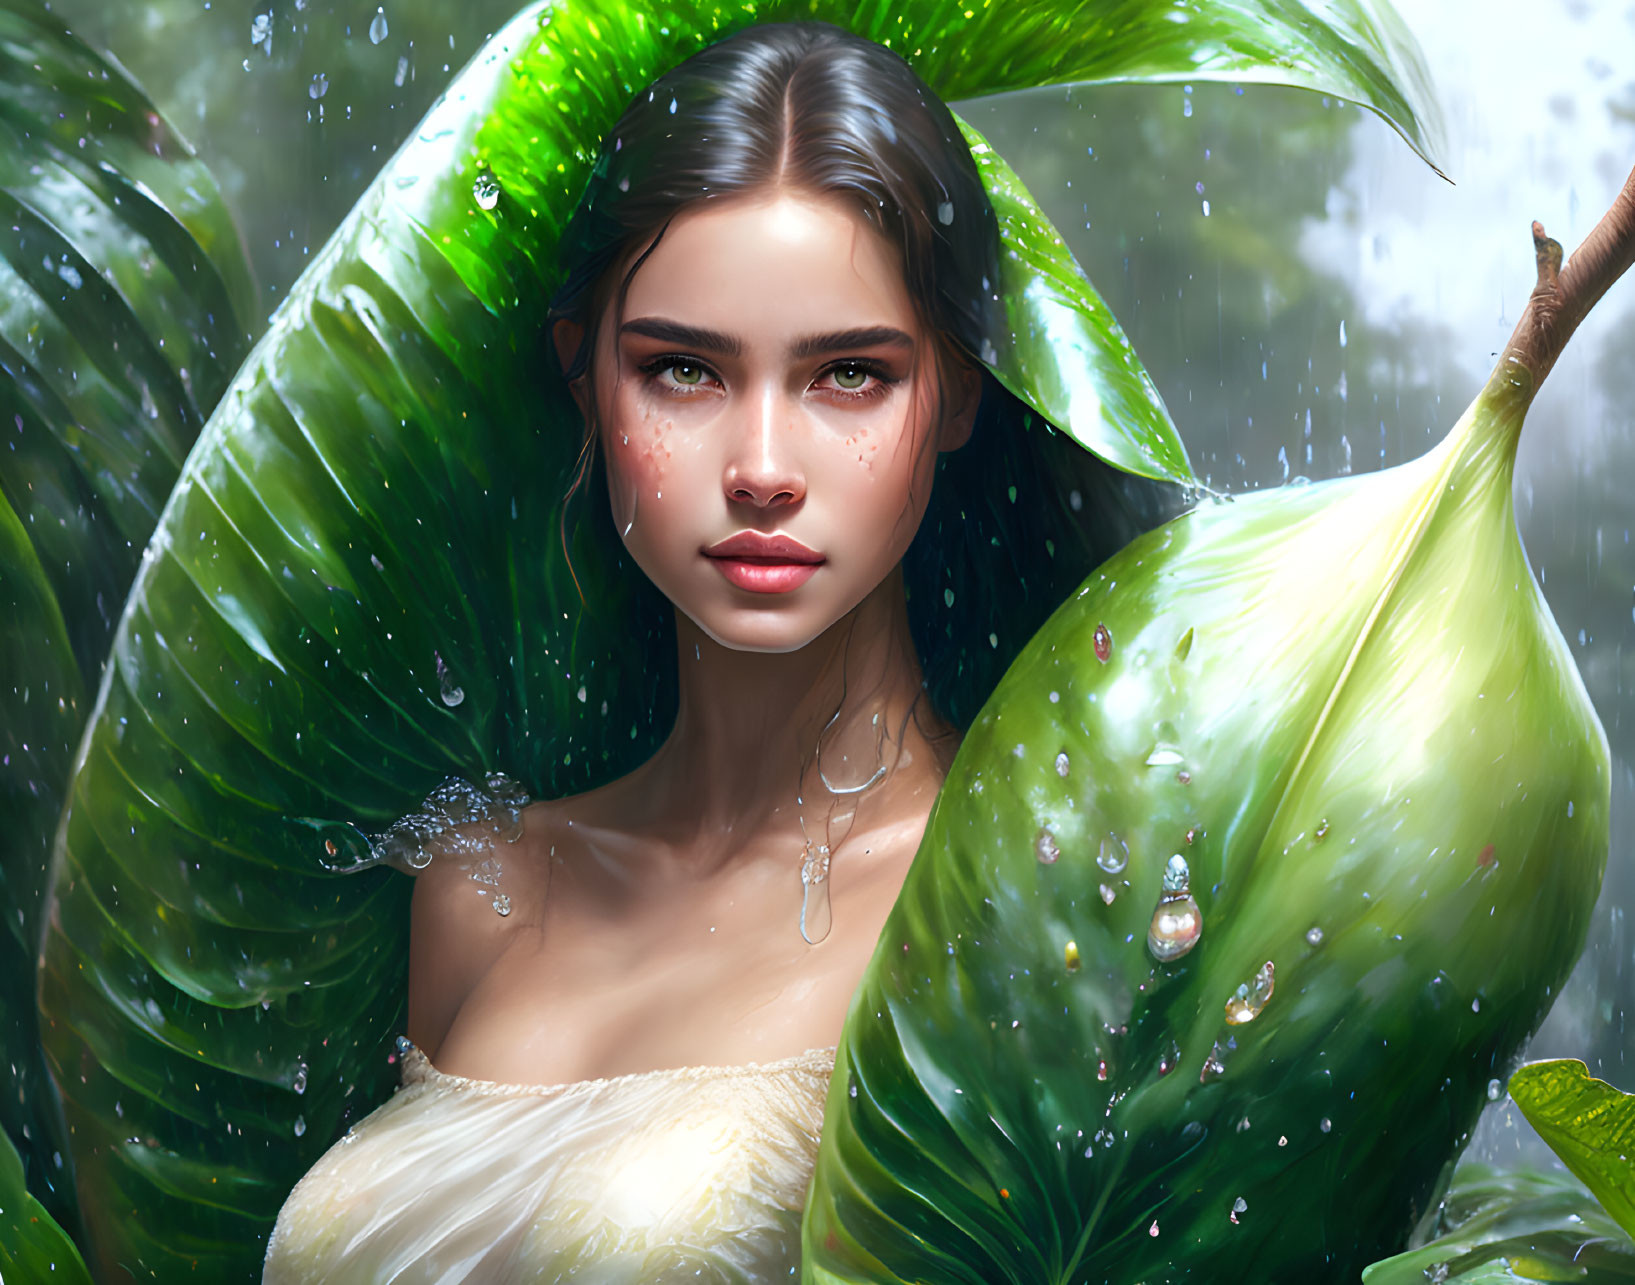 Digital art portrait of woman with clear skin among glossy green leaves and water droplets